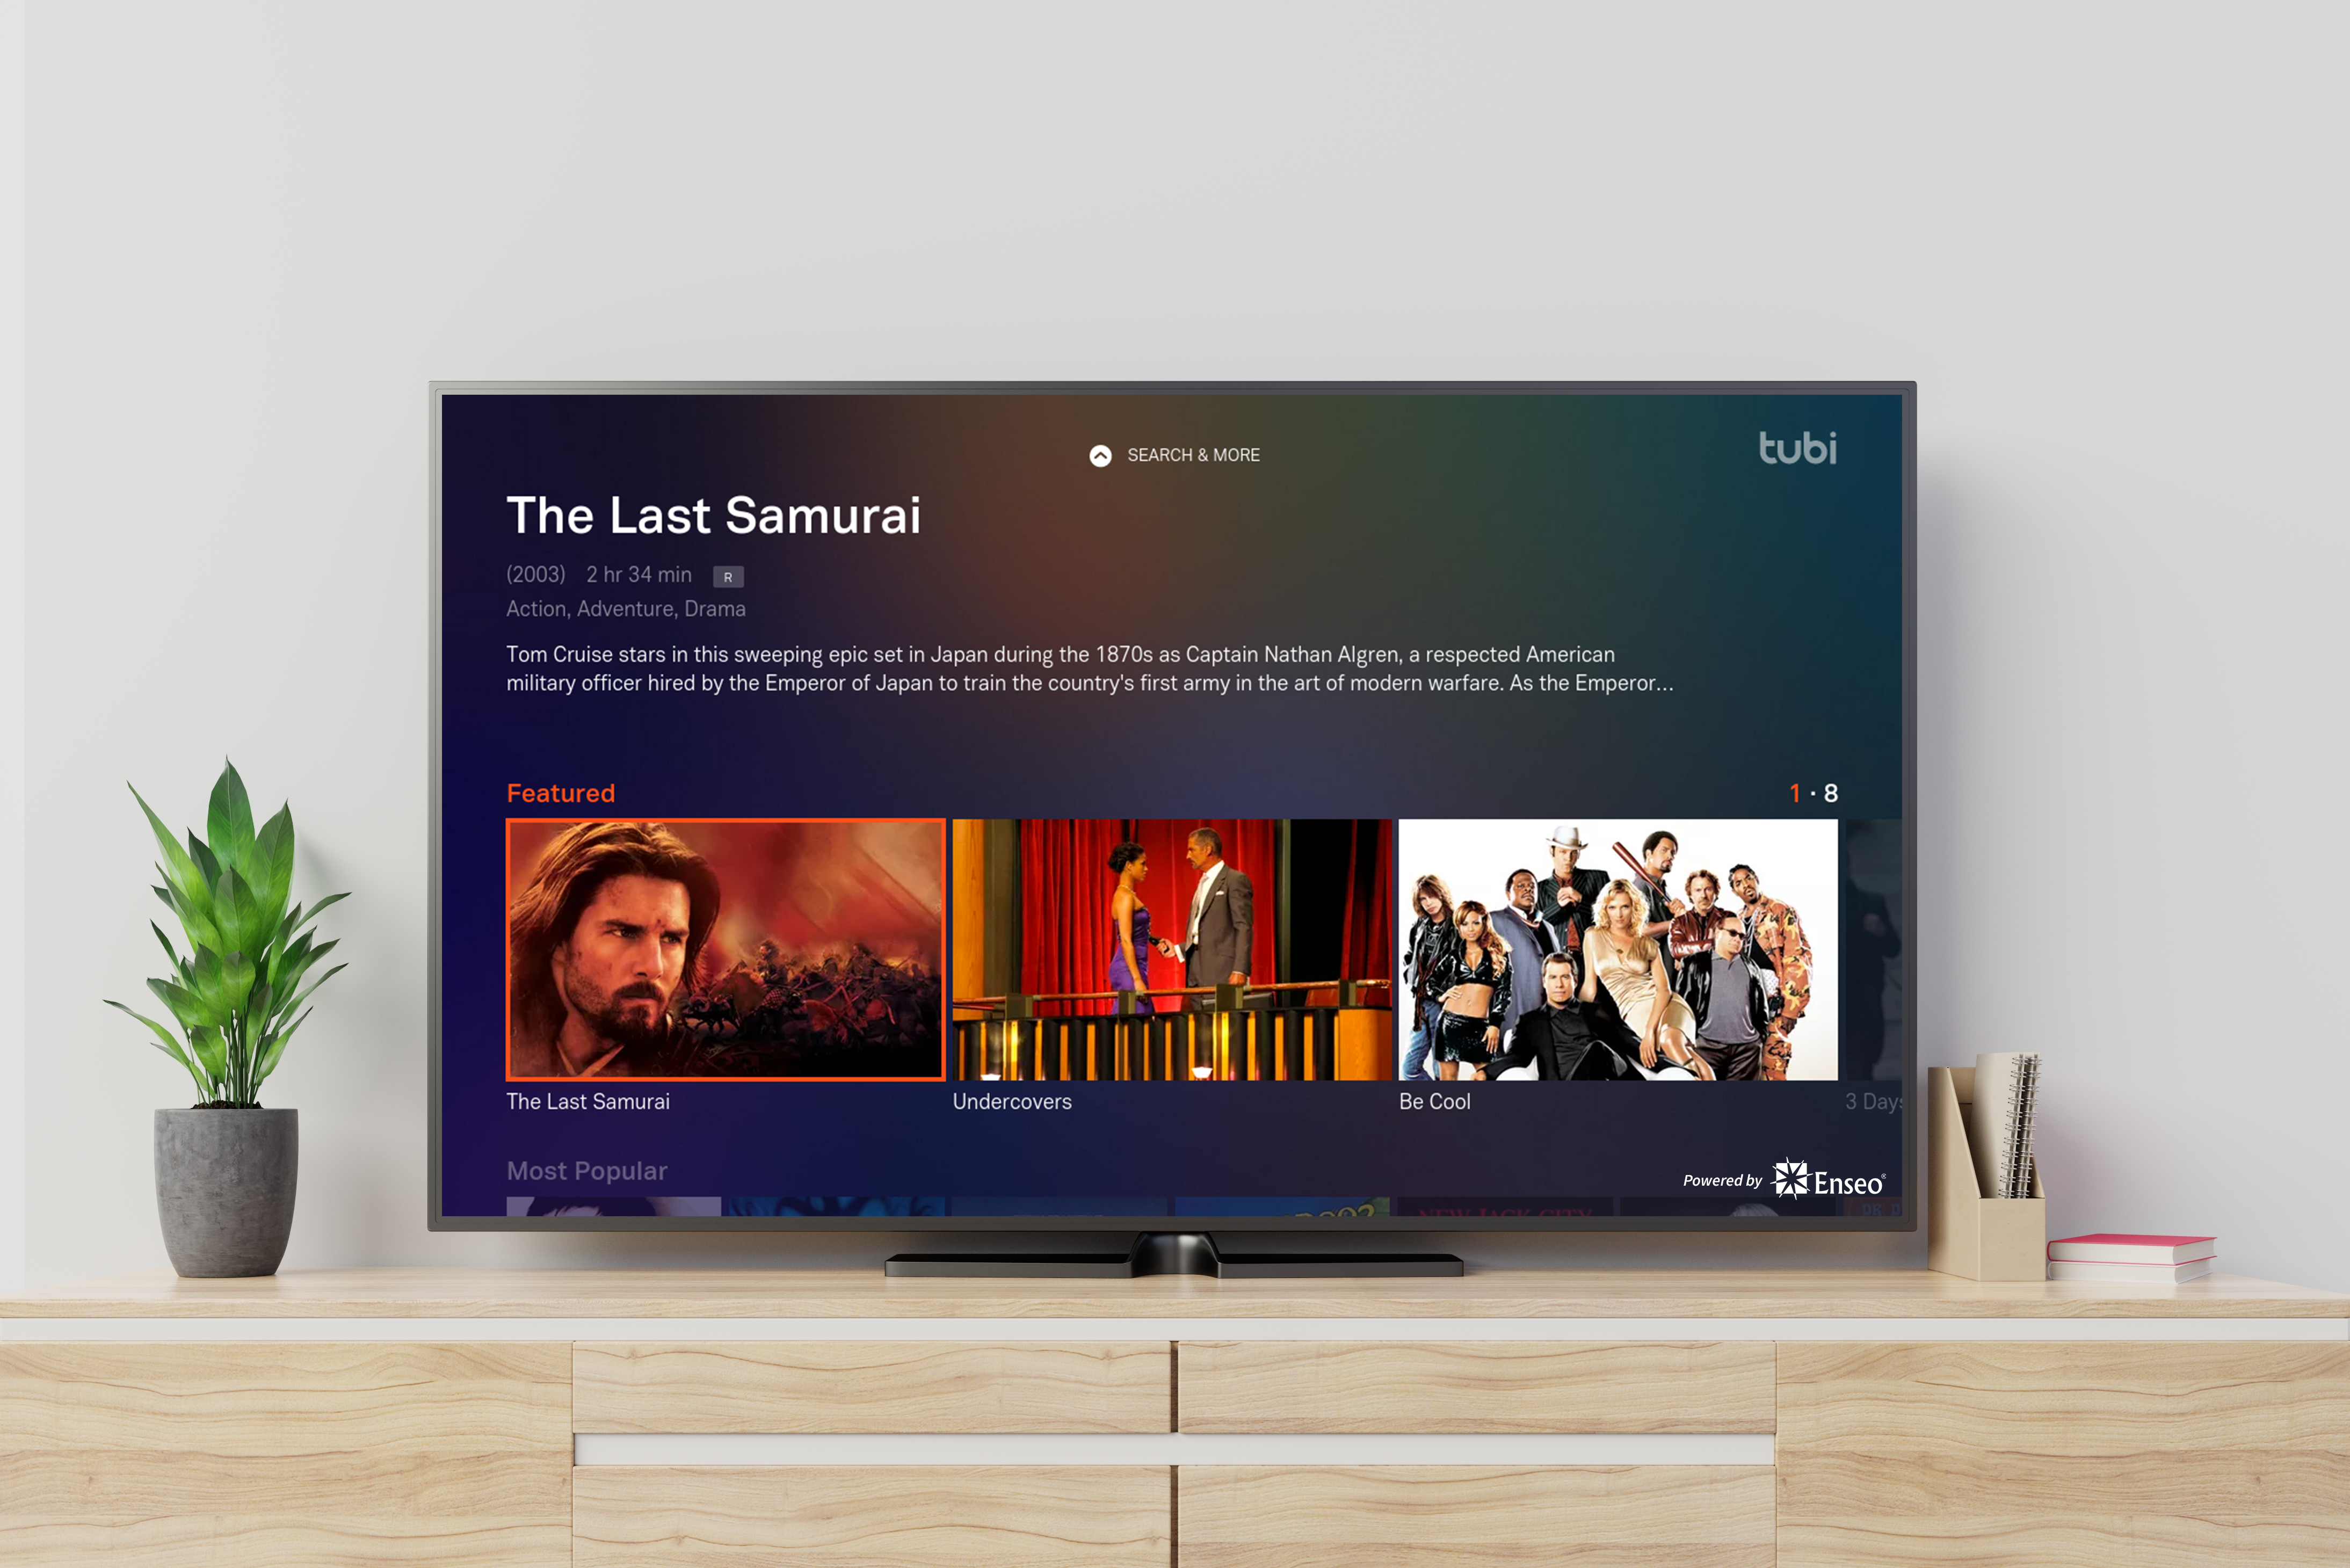 Tubi partners with Enseo